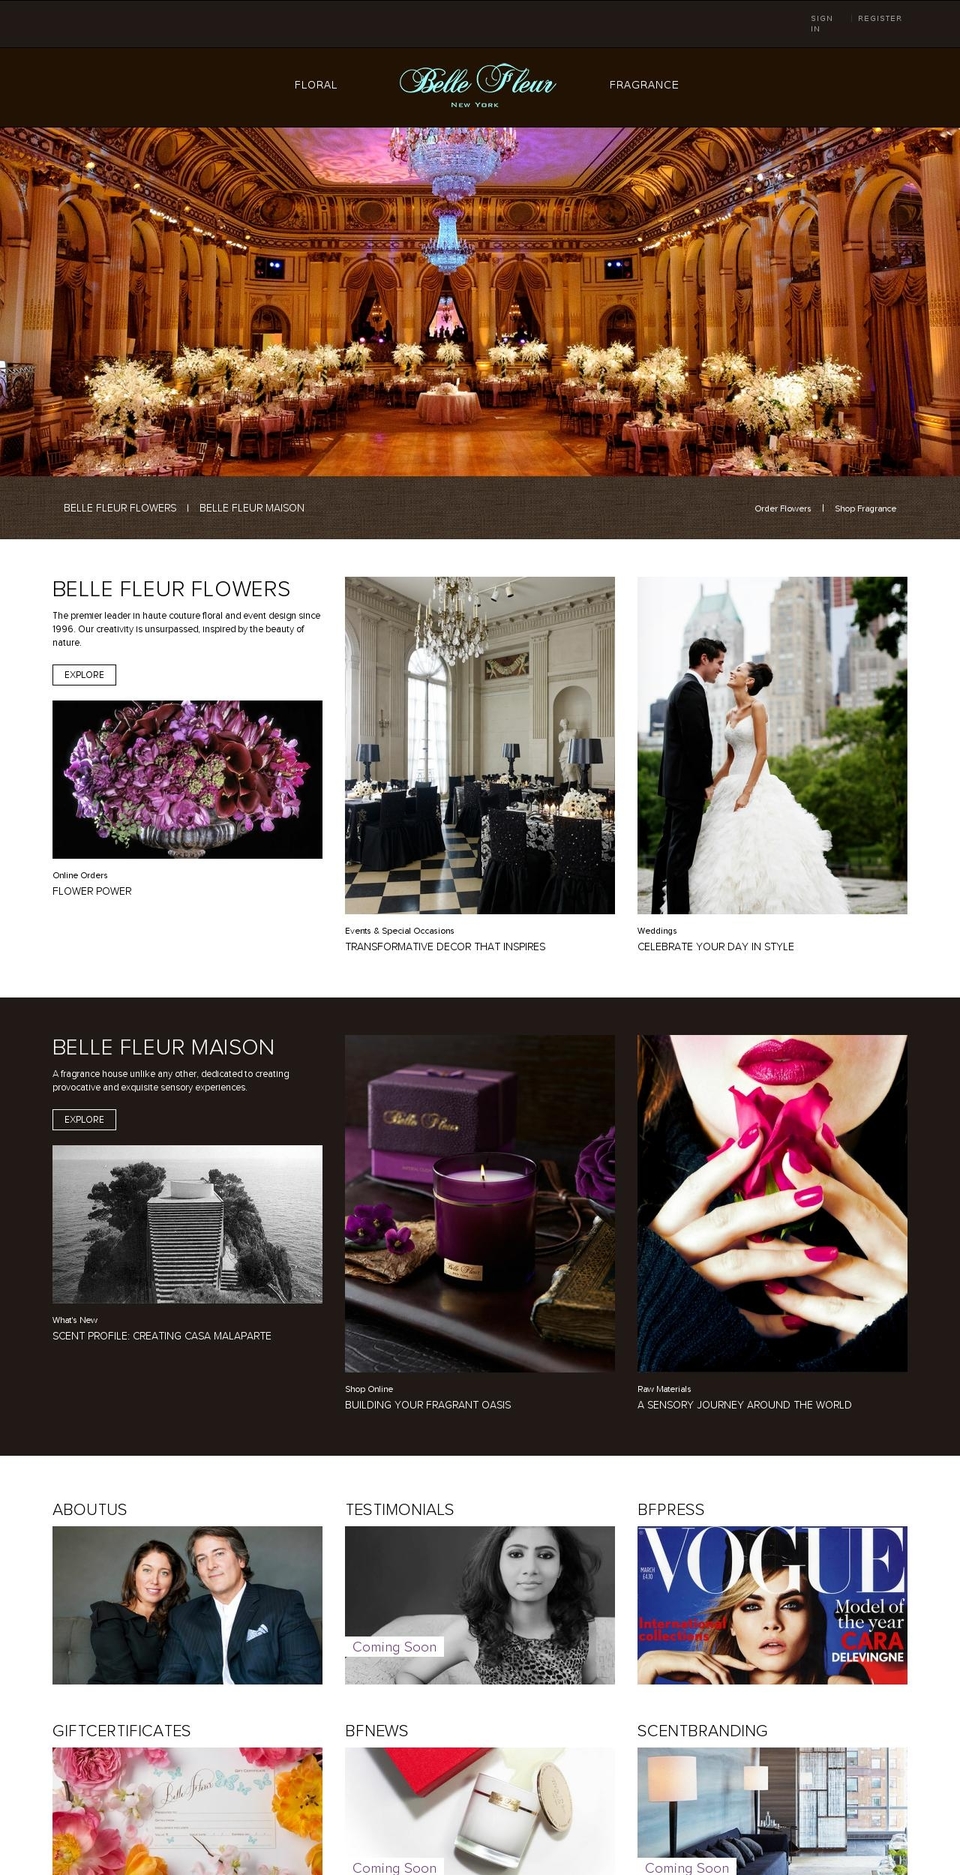 belle Shopify theme site example bellefleurny.com